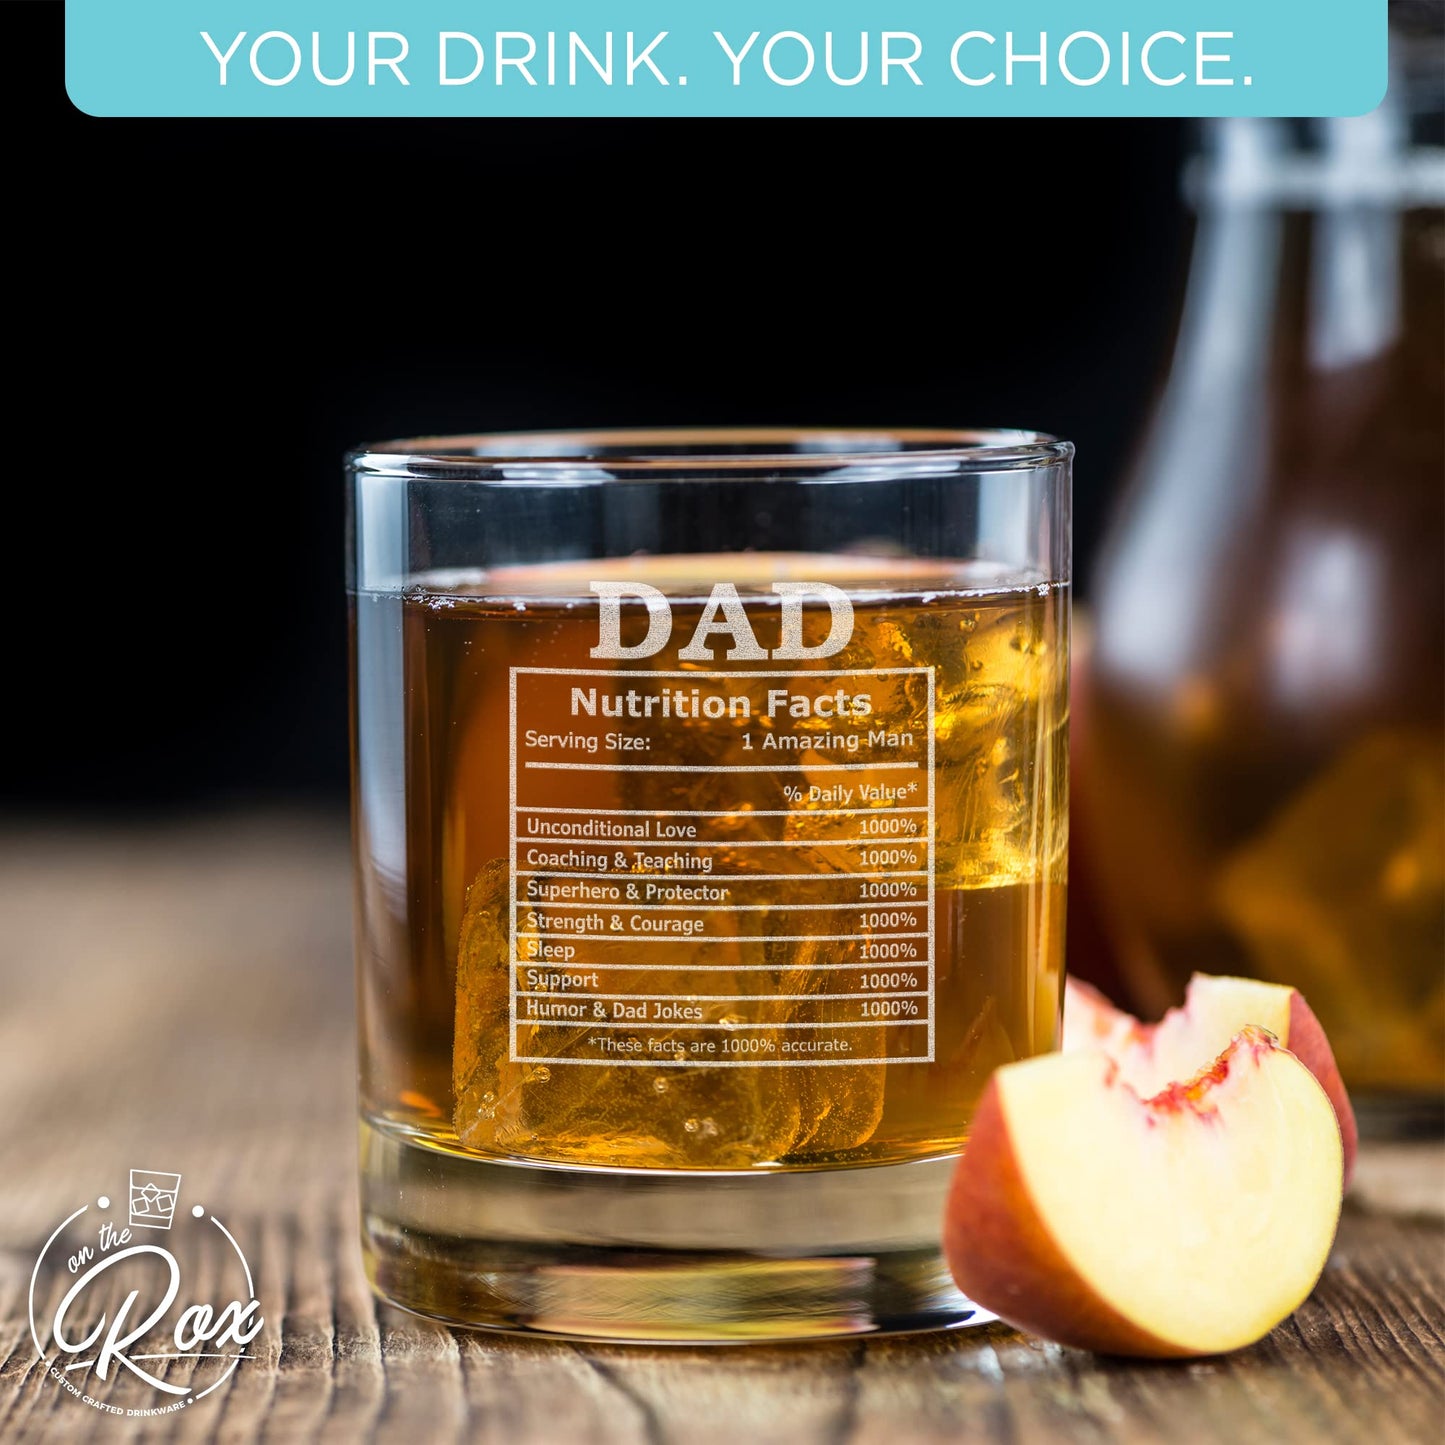 Whiskey Gifts for Dad- 11 Oz "Dad Nutrition" Engraved Whiskey Glass - Father's Day Gift, Dad Birthday Gifts From Daughter, Wife or Son - Bourbon Glass - Old Fashion Glass - 6 Designs To Choose From